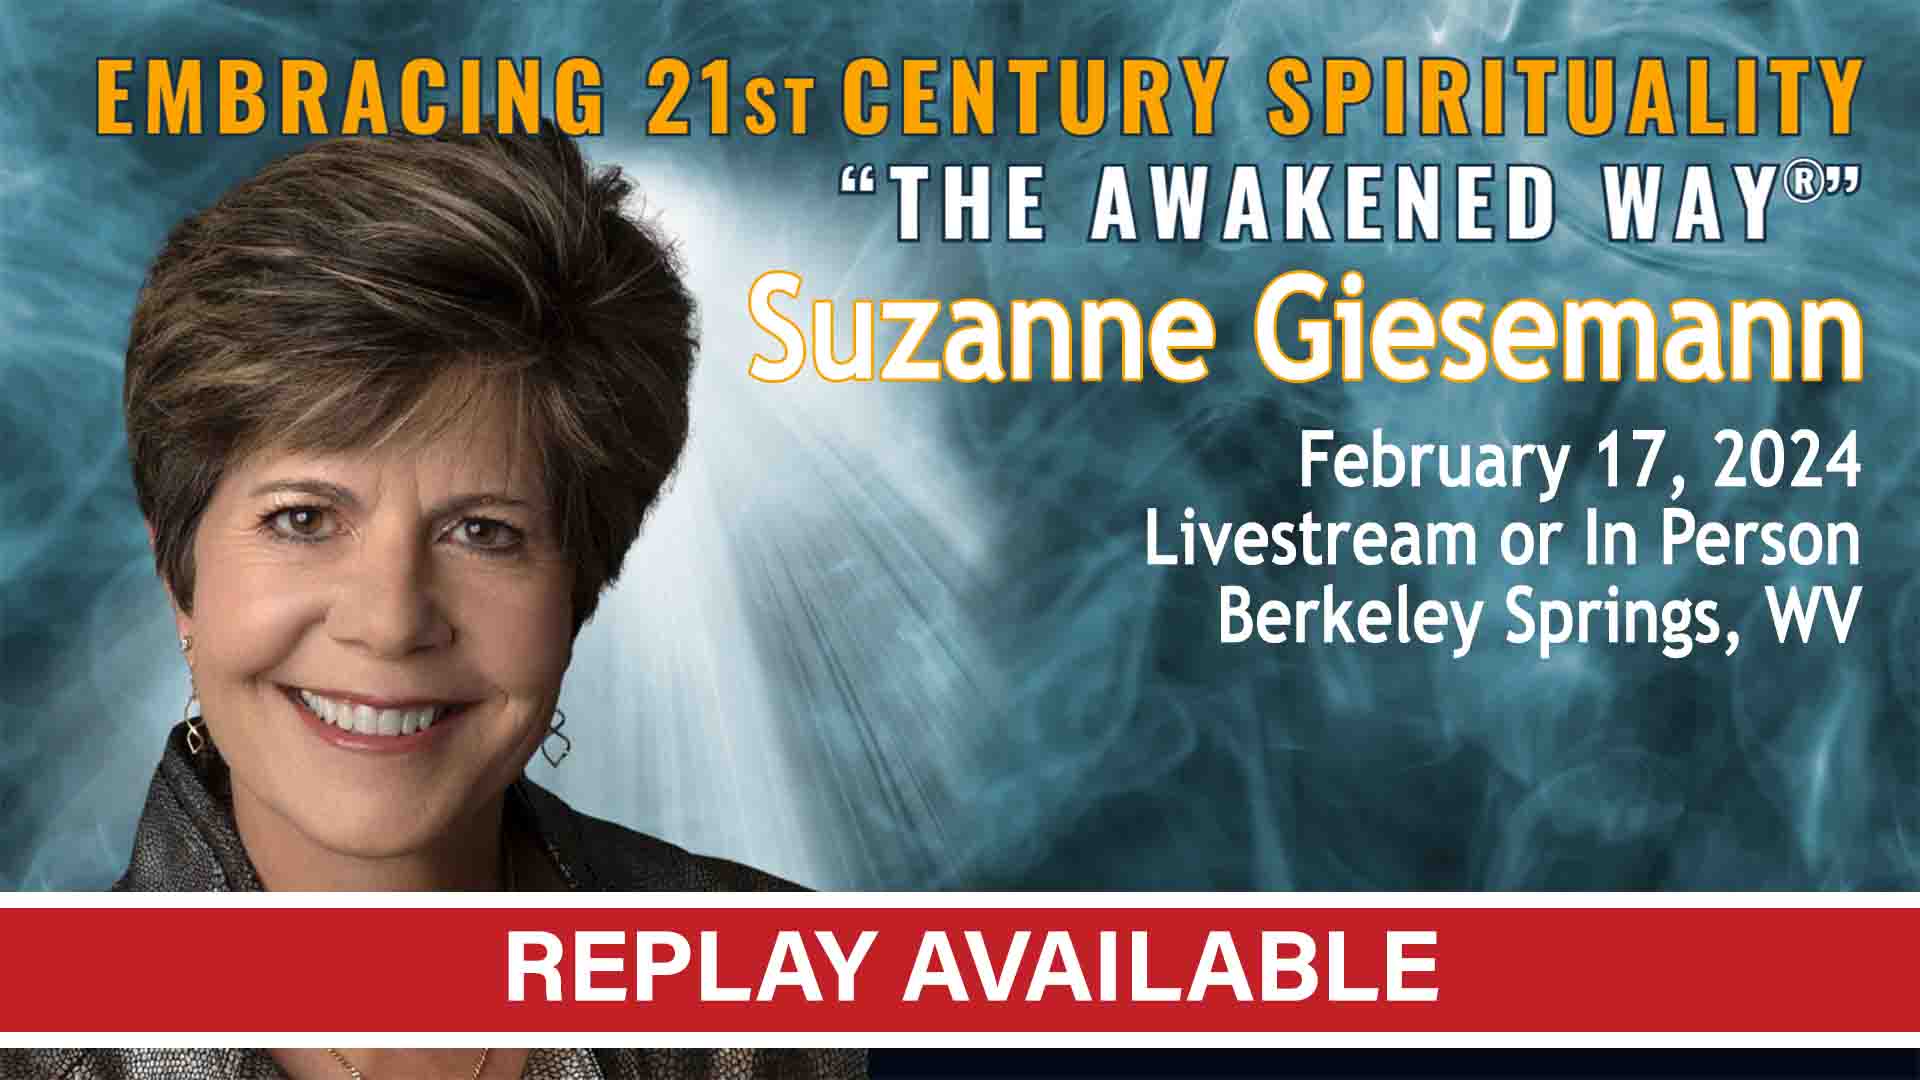 Suzanne Giesemann replay available